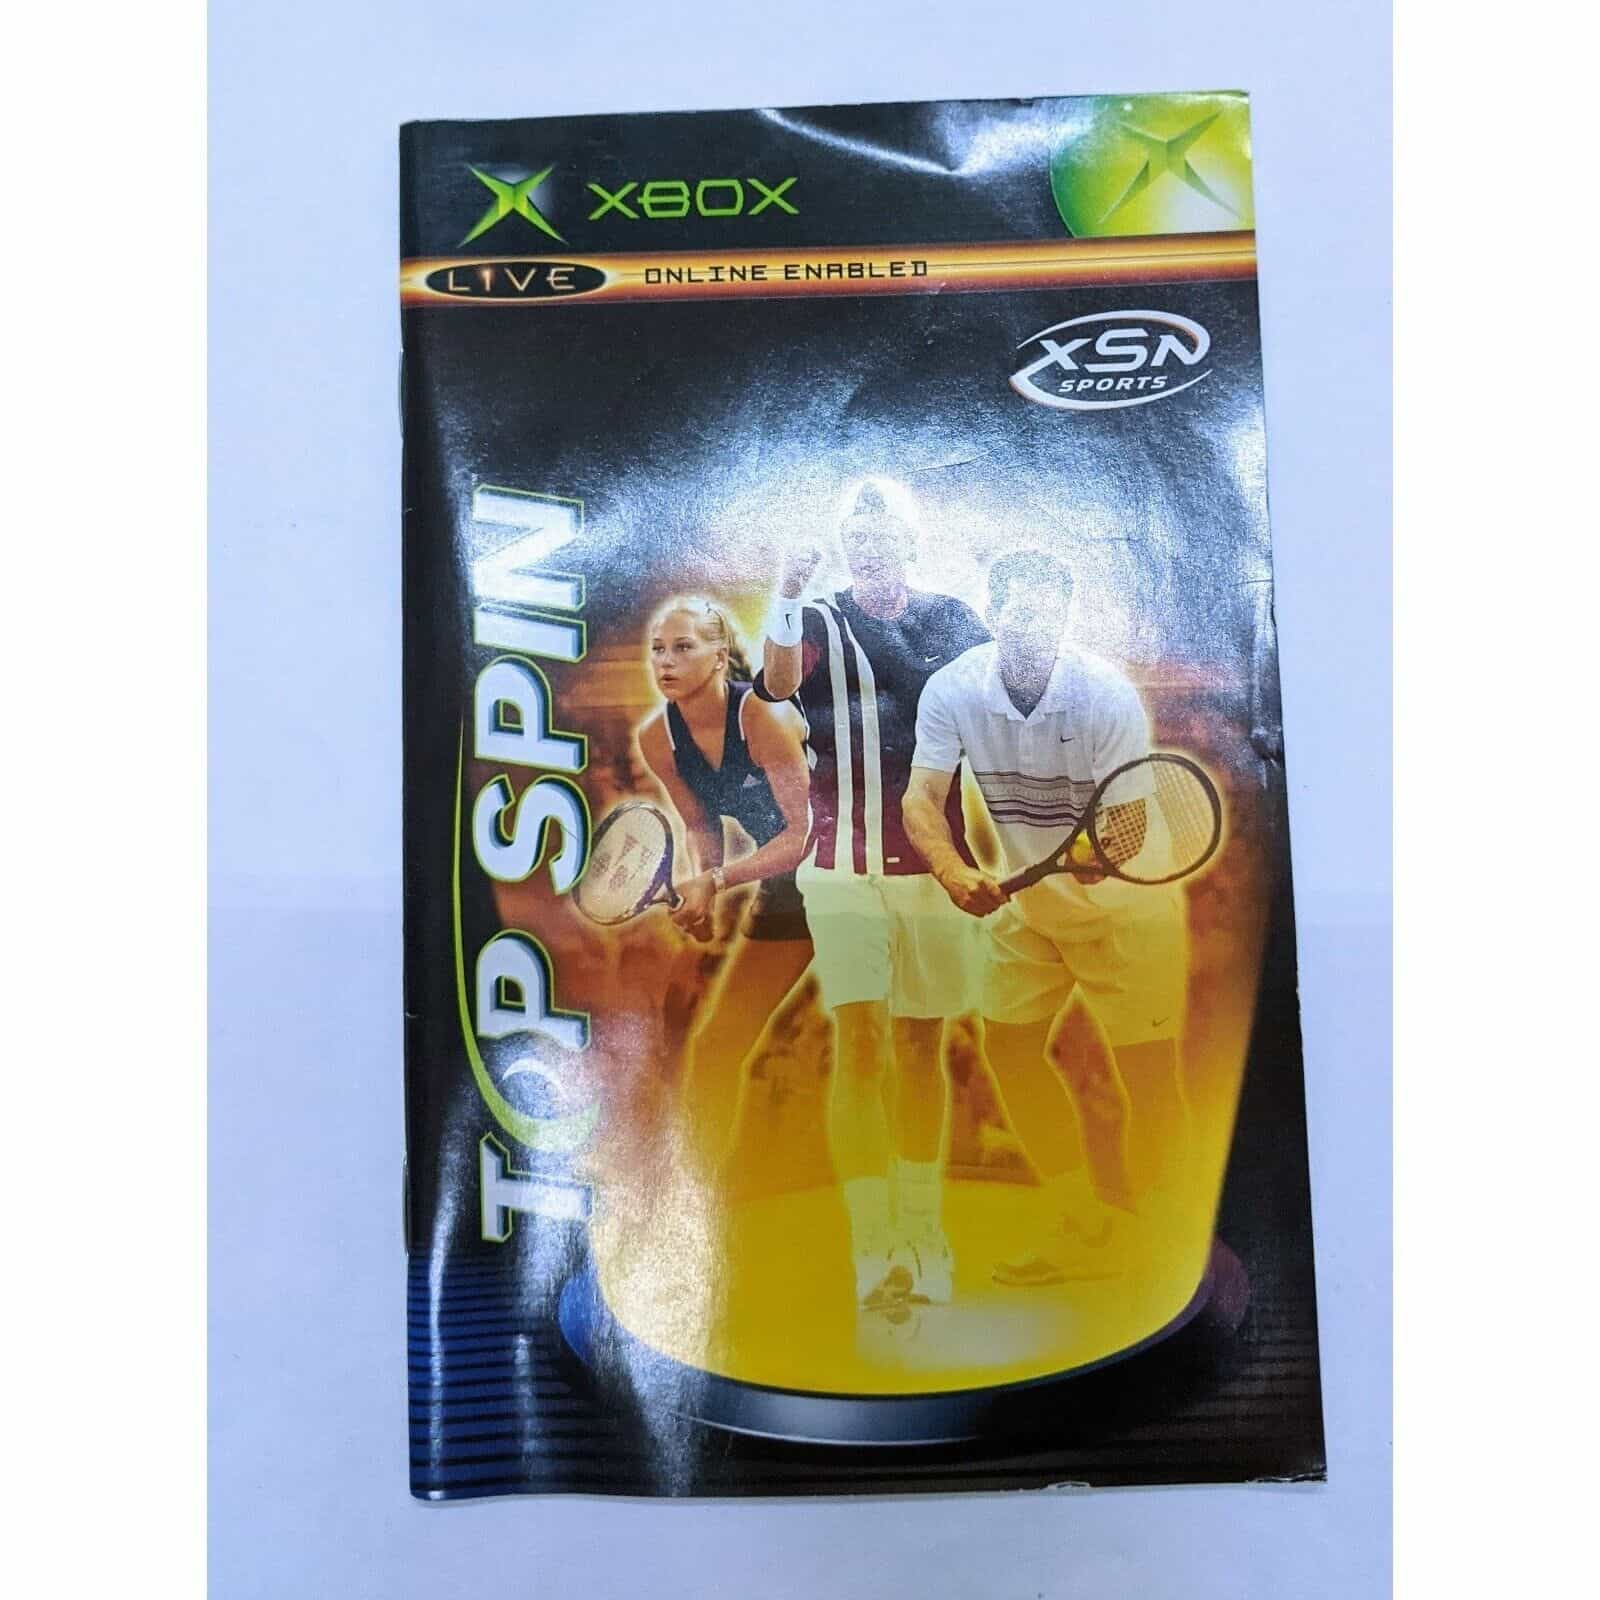 Top Spin Xbox Game Manual